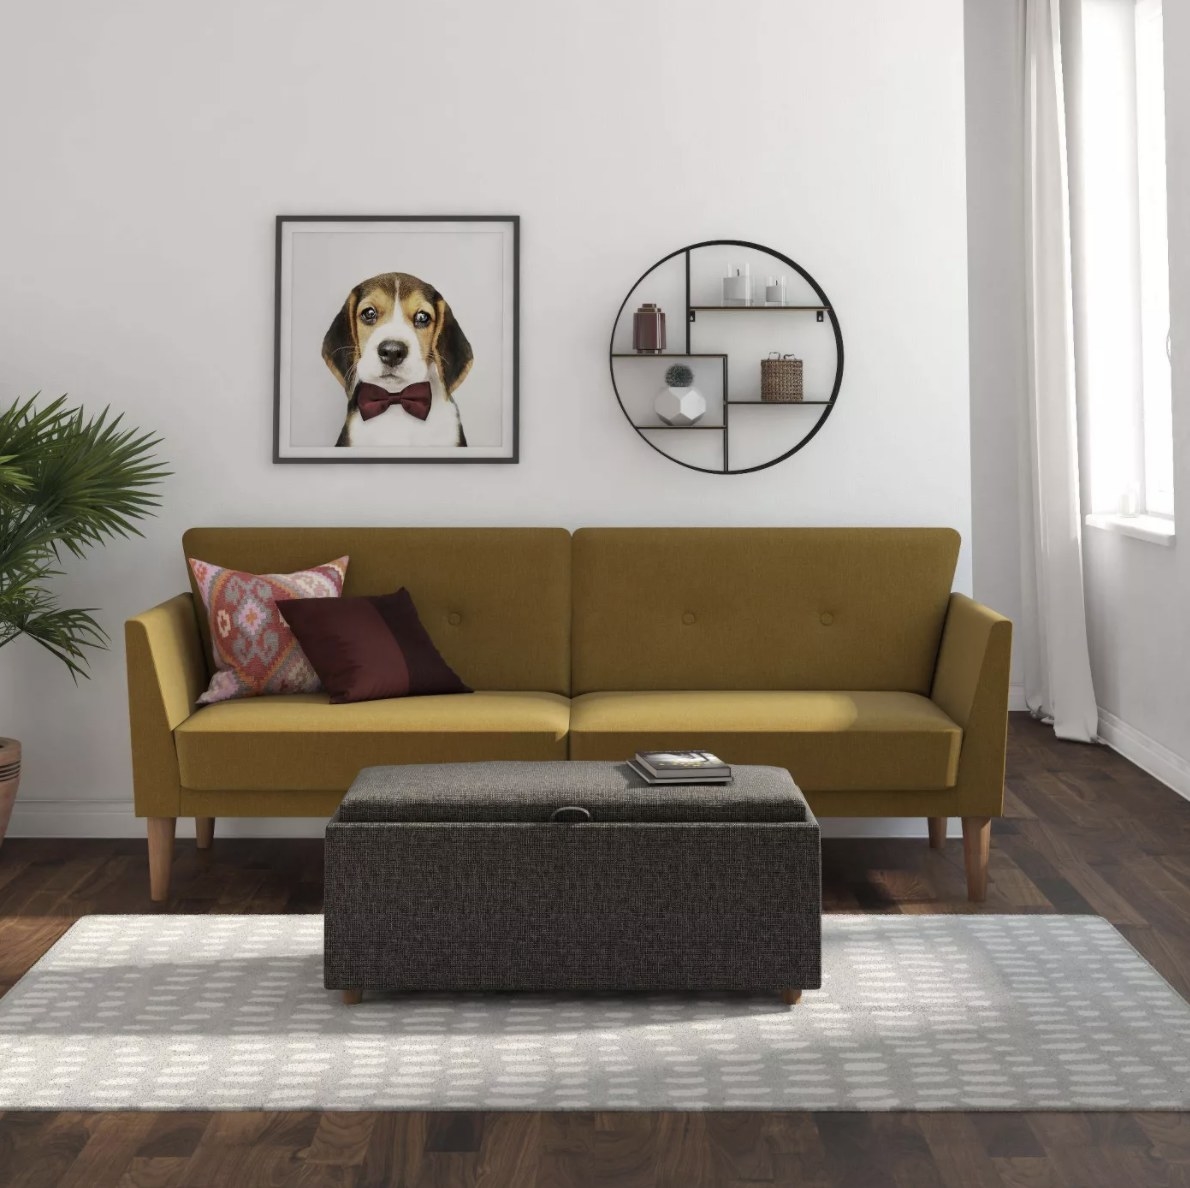 A mustard-colored futon in a modern living room